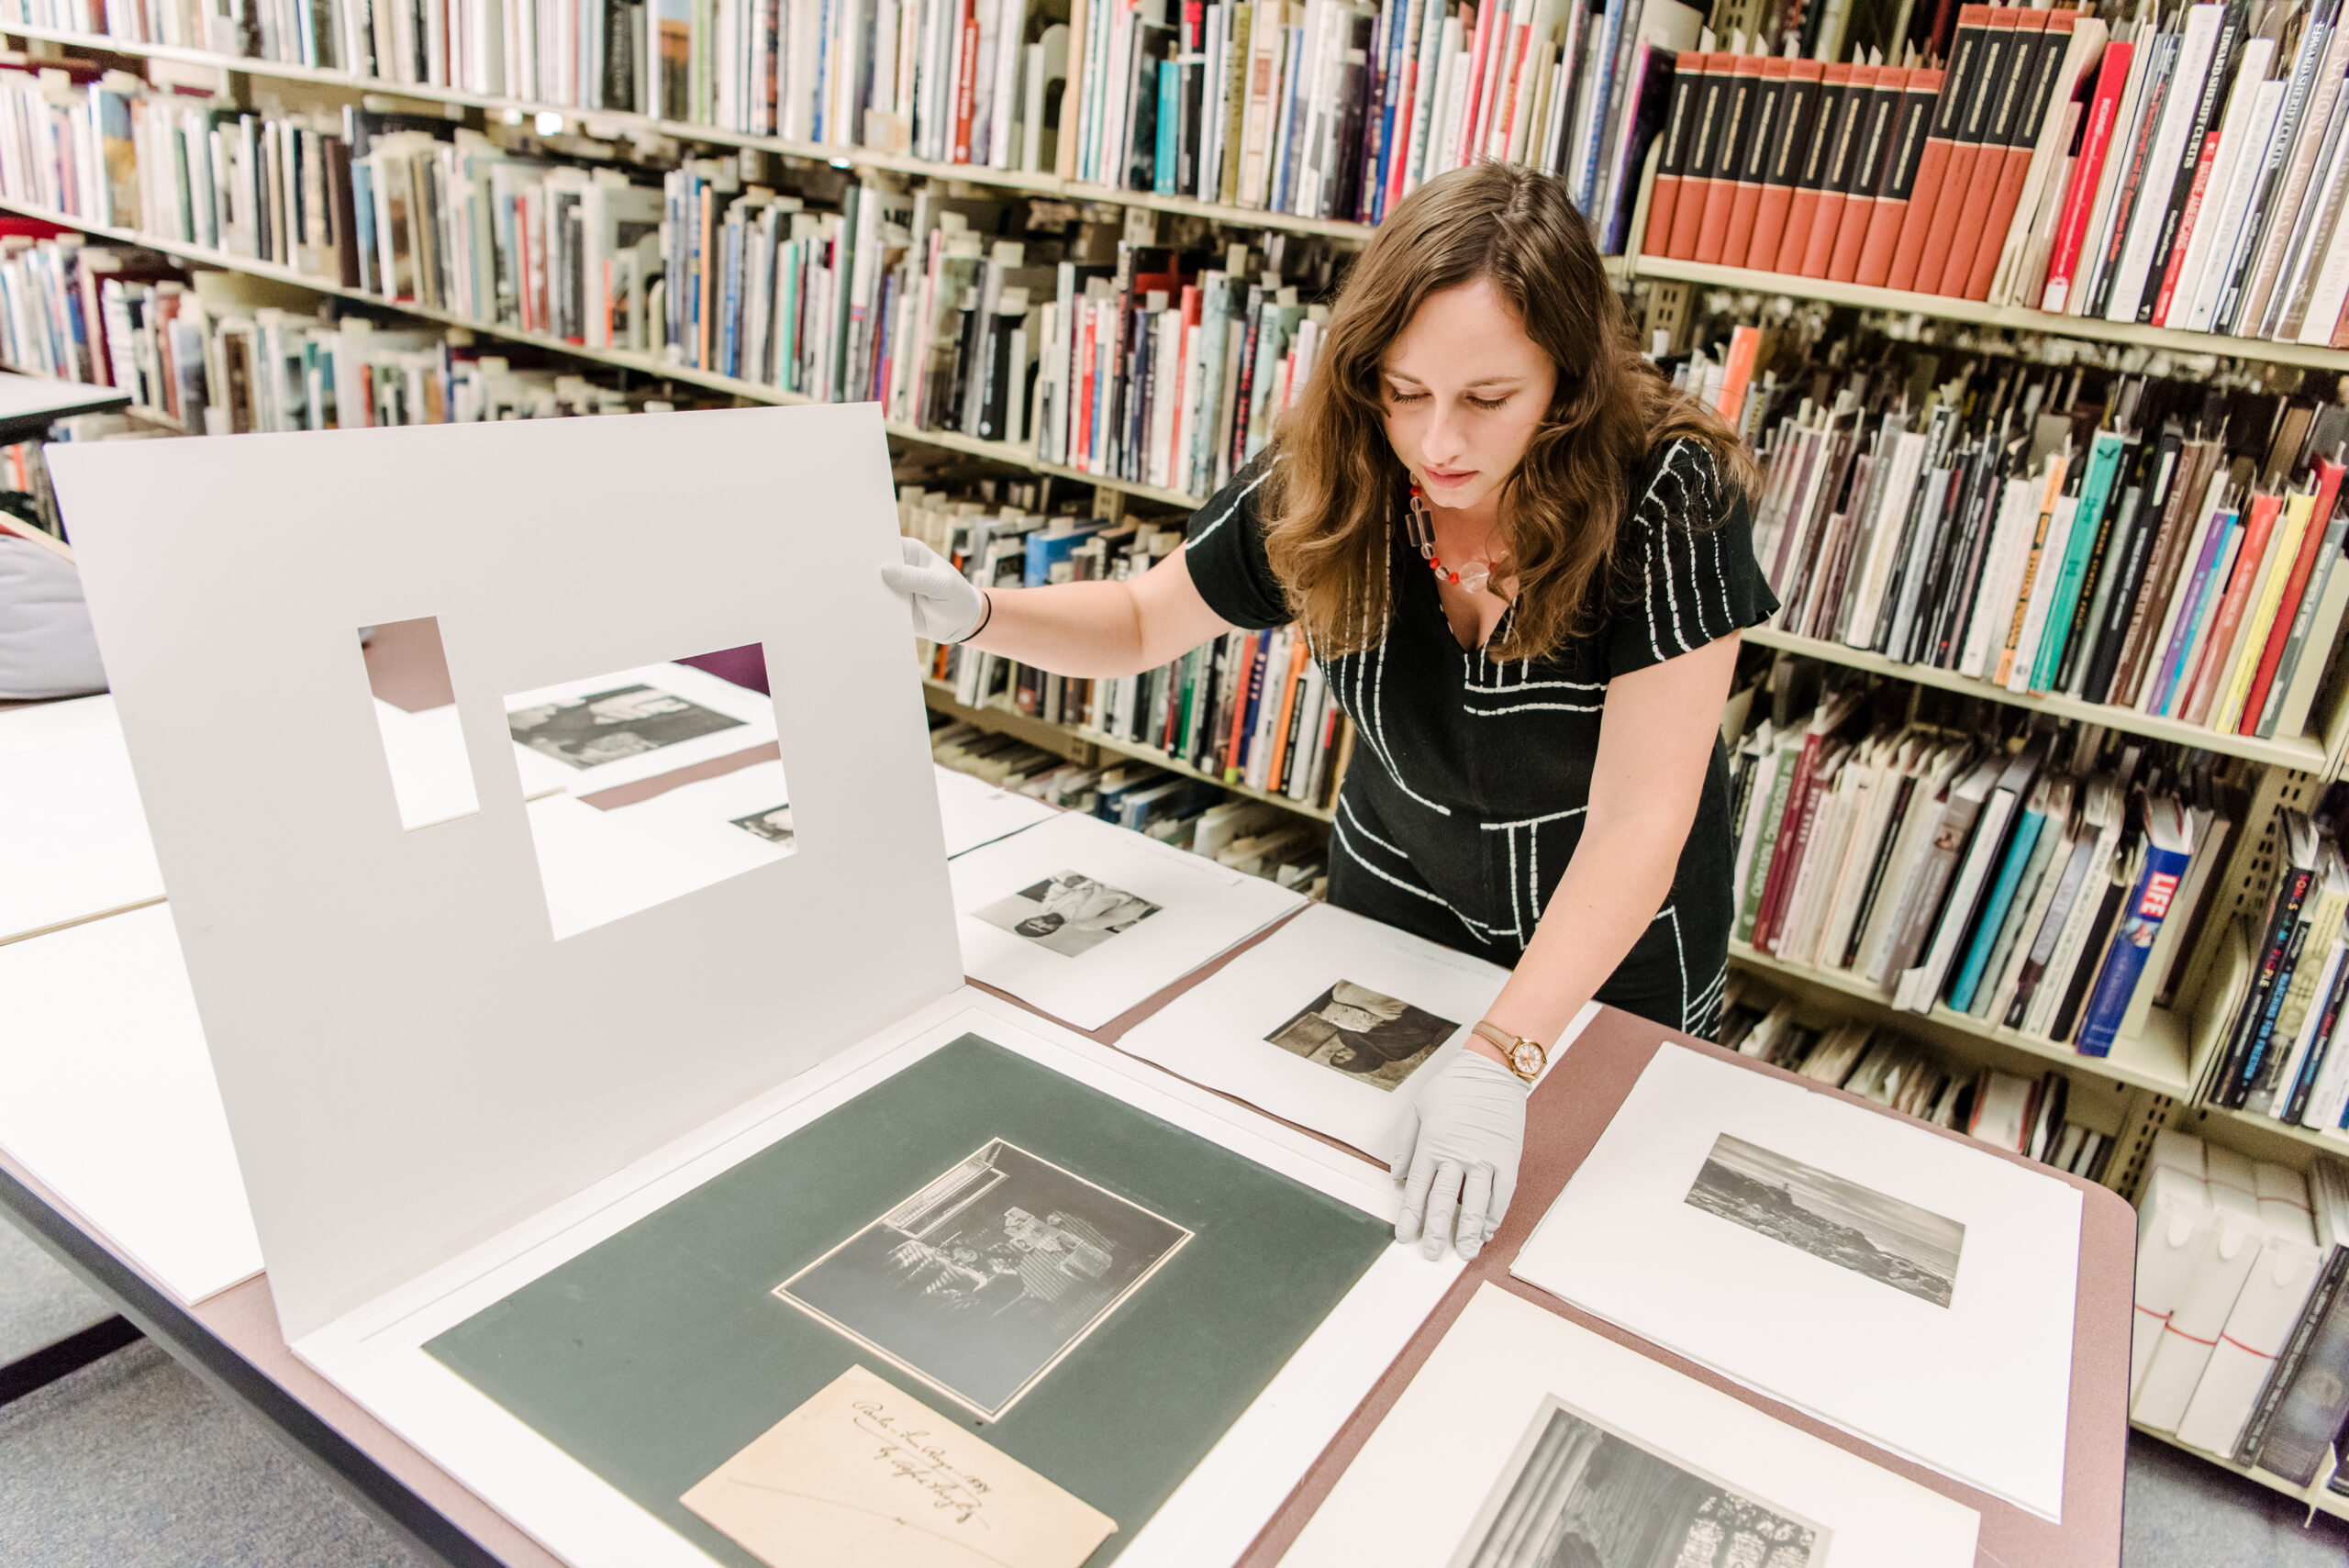 UMBC welcomes Beth Saunders as the new curator and head of Special Collections